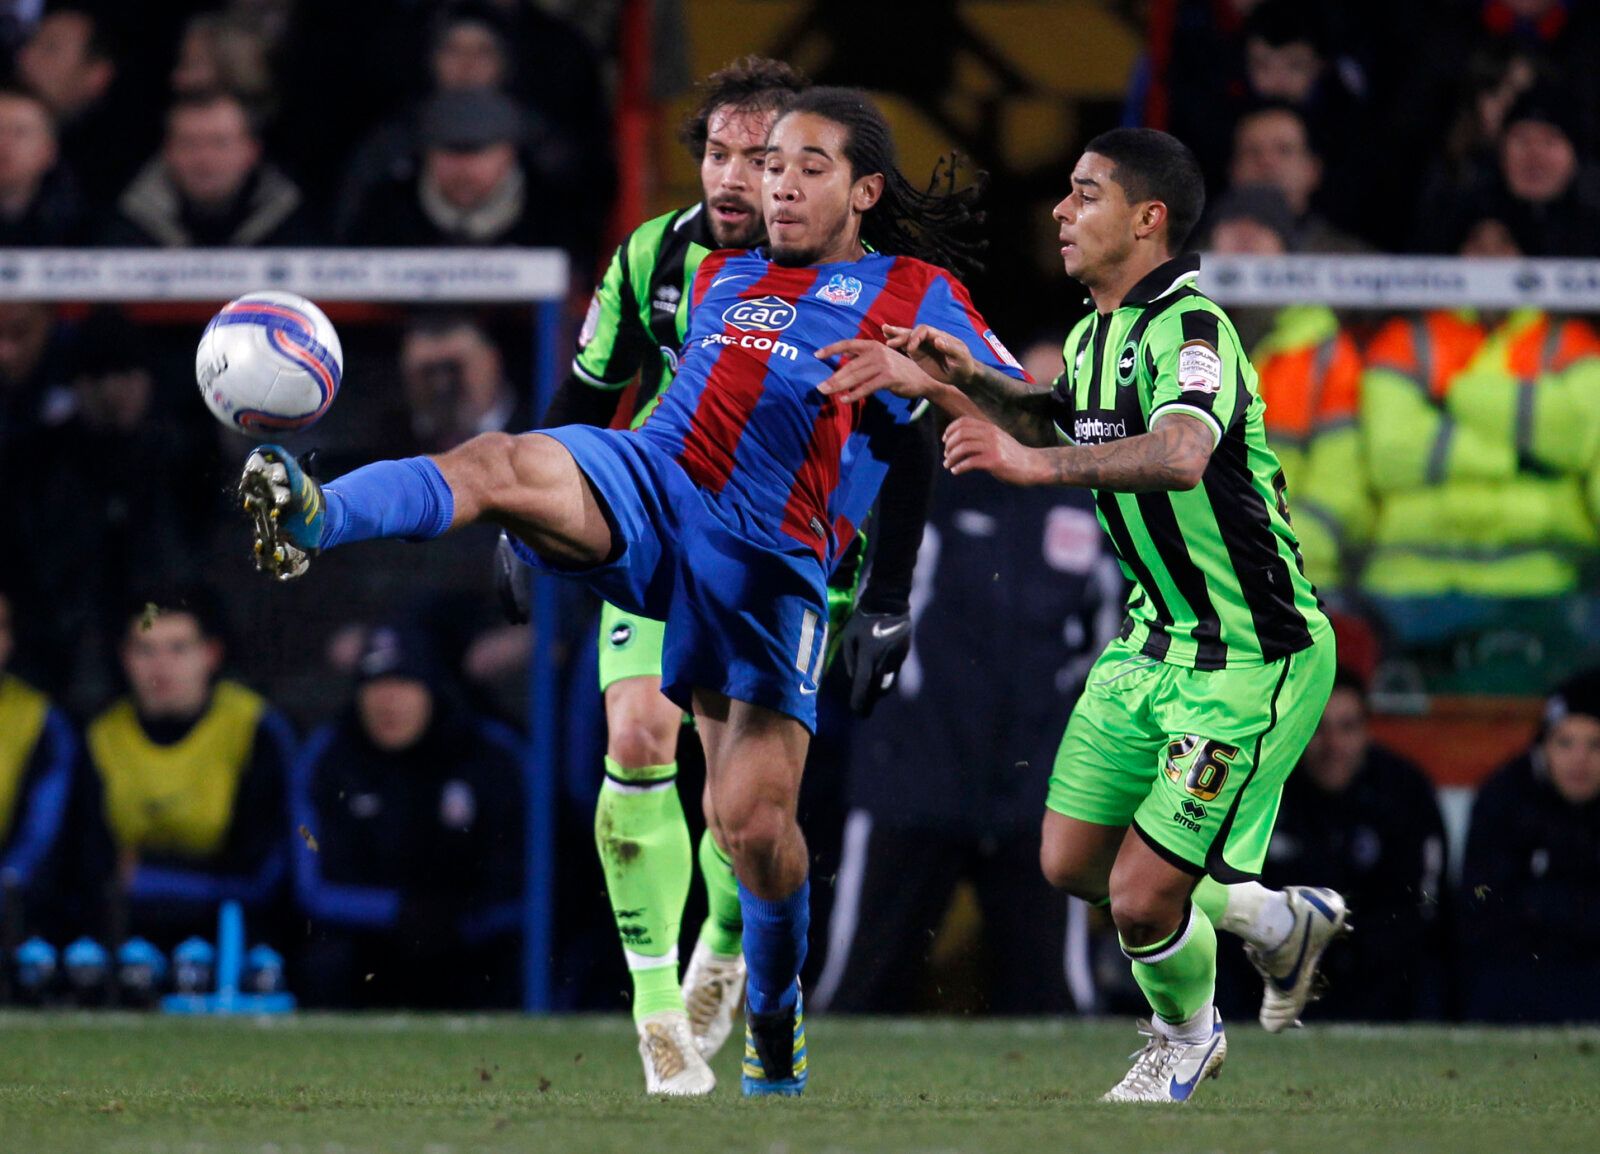 Football - Crystal Palace v Brighton &amp; Hove Albion npower Football League Championship  - Selhurst Park  - 31/1/12 
Crystal Palace's Sean Scannell (C)and Brighton and Hove Albion's Inigo Calderon (L) and Liam Bridcutt in action 
Mandatory Credit: Action Images / Jed Leicester 
Livepic 
EDITORIAL USE ONLY. No use with unauthorized audio, video, data, fixture lists, club/league logos or live services. Online in-match use limited to 45 images, no video emulation. No use in betting, games or sin